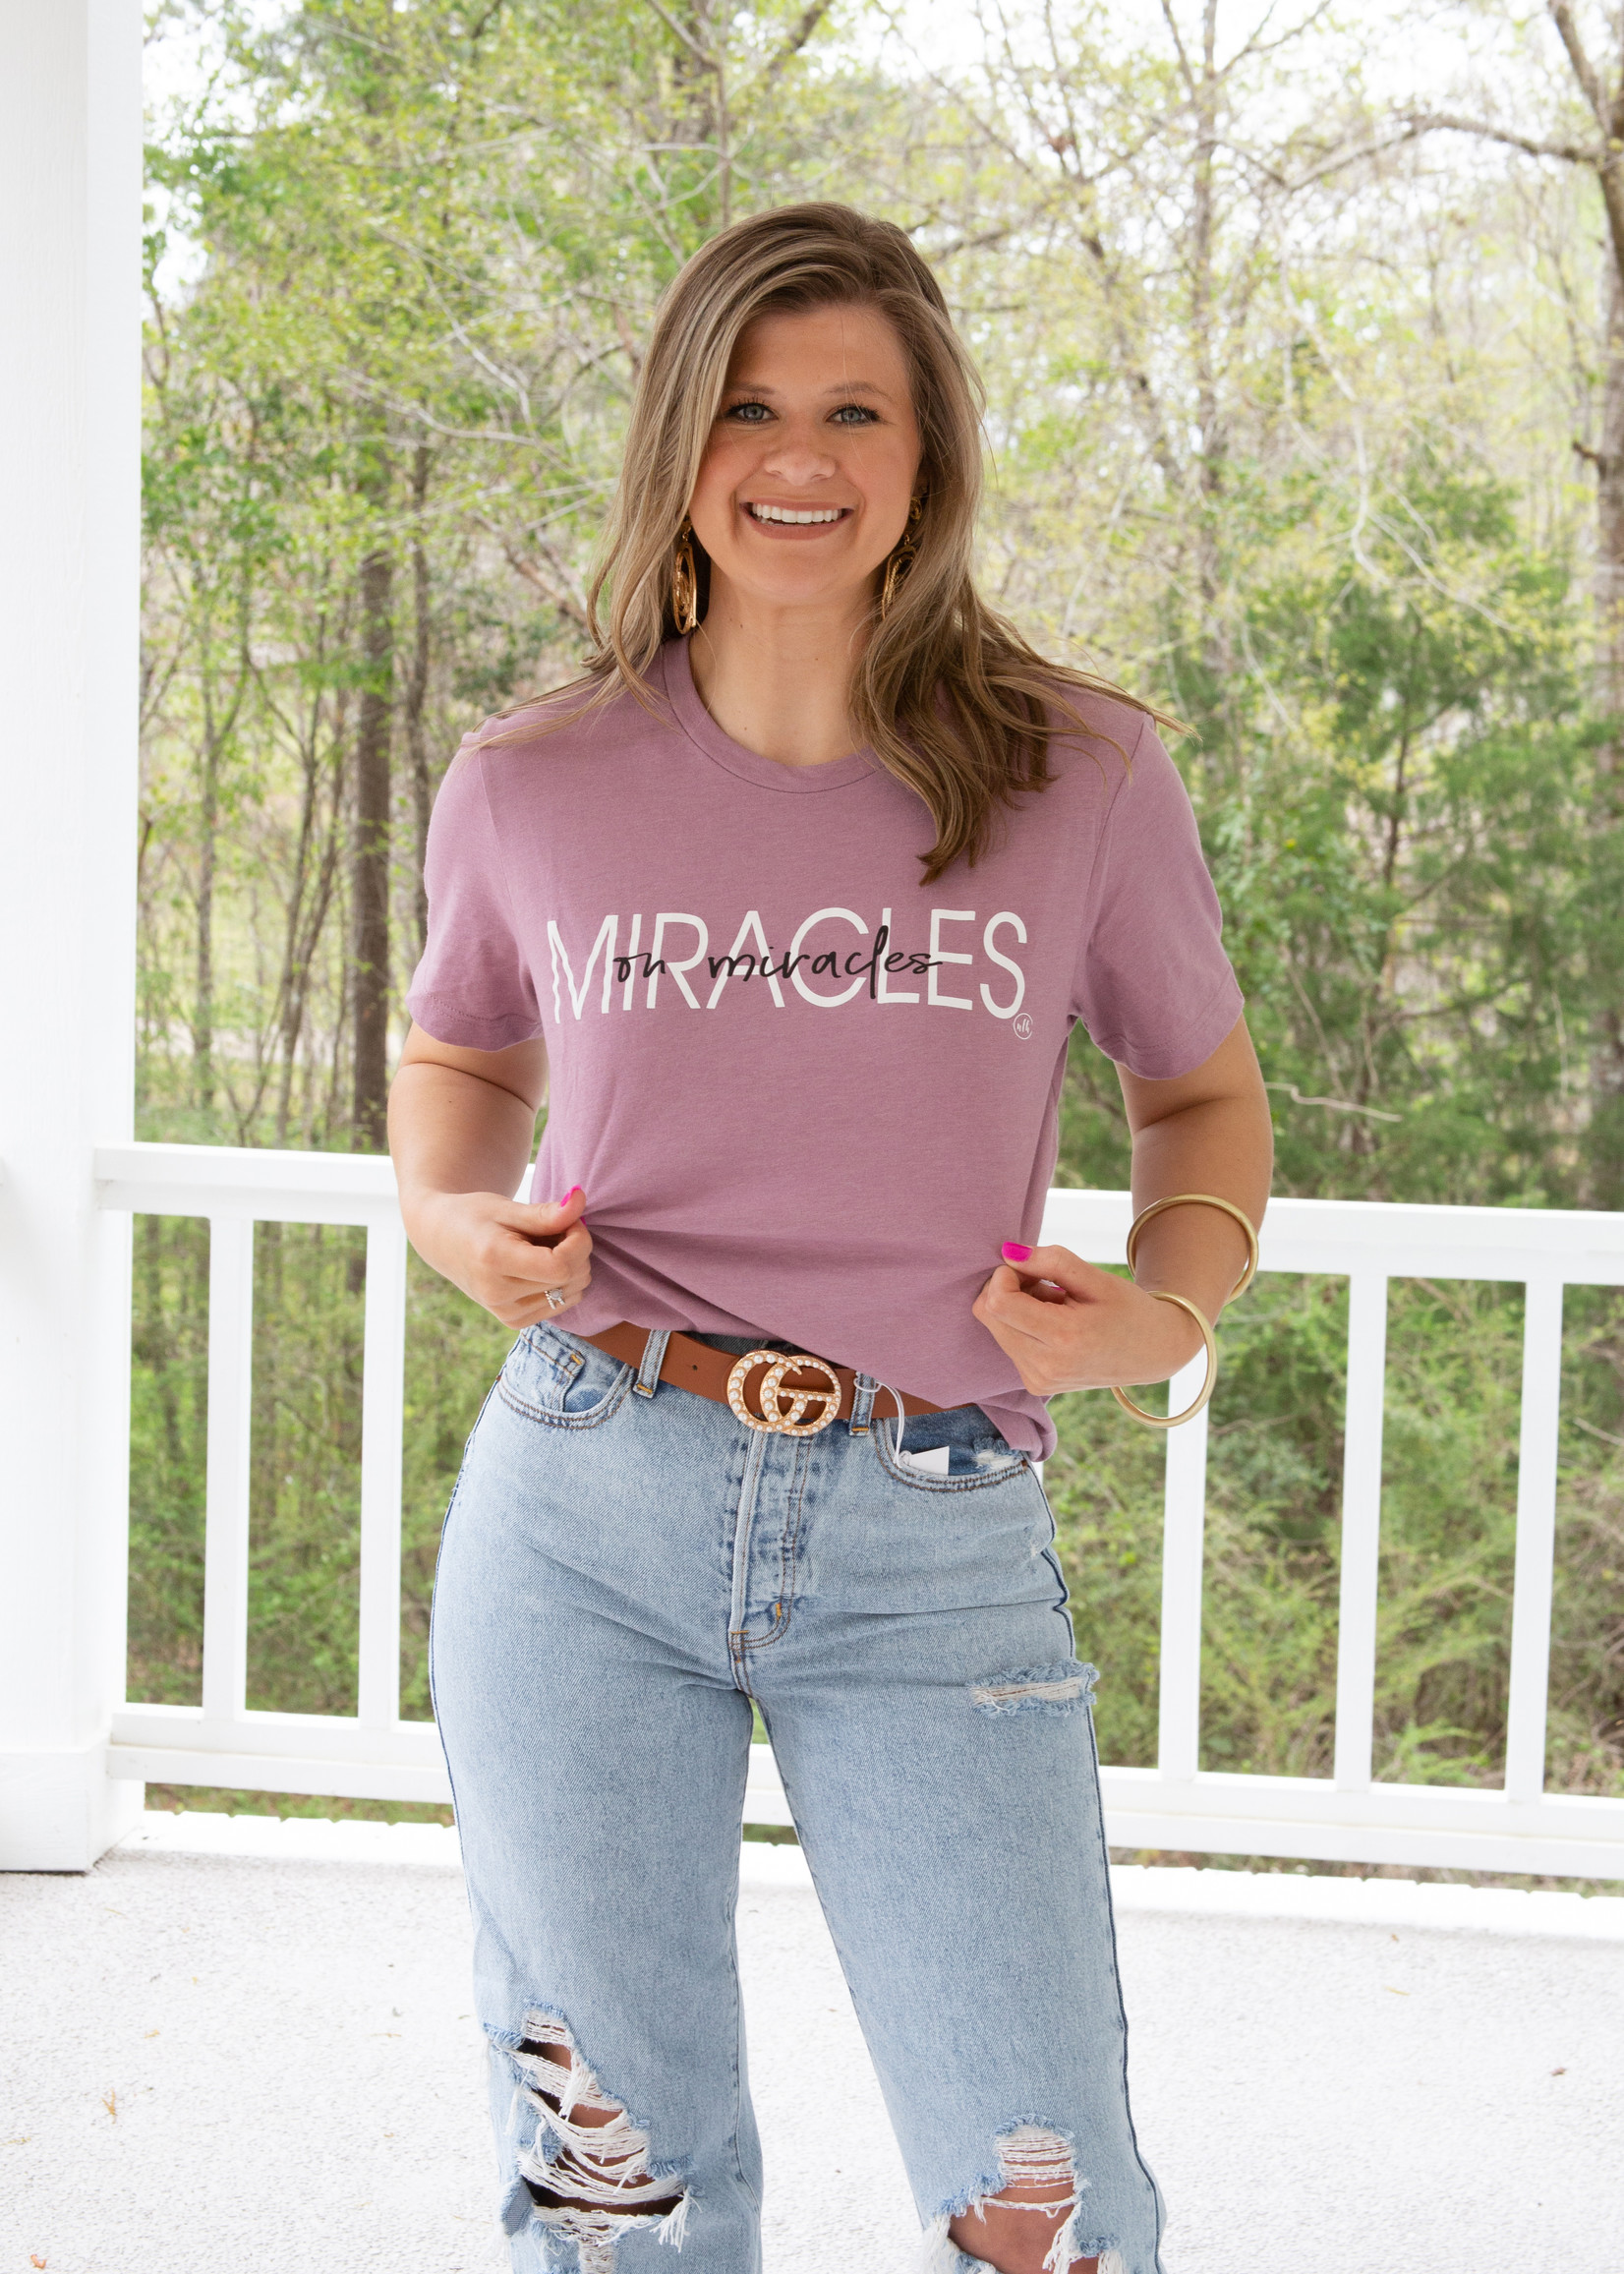 Miracles On Miracles Short Sleeve Tee